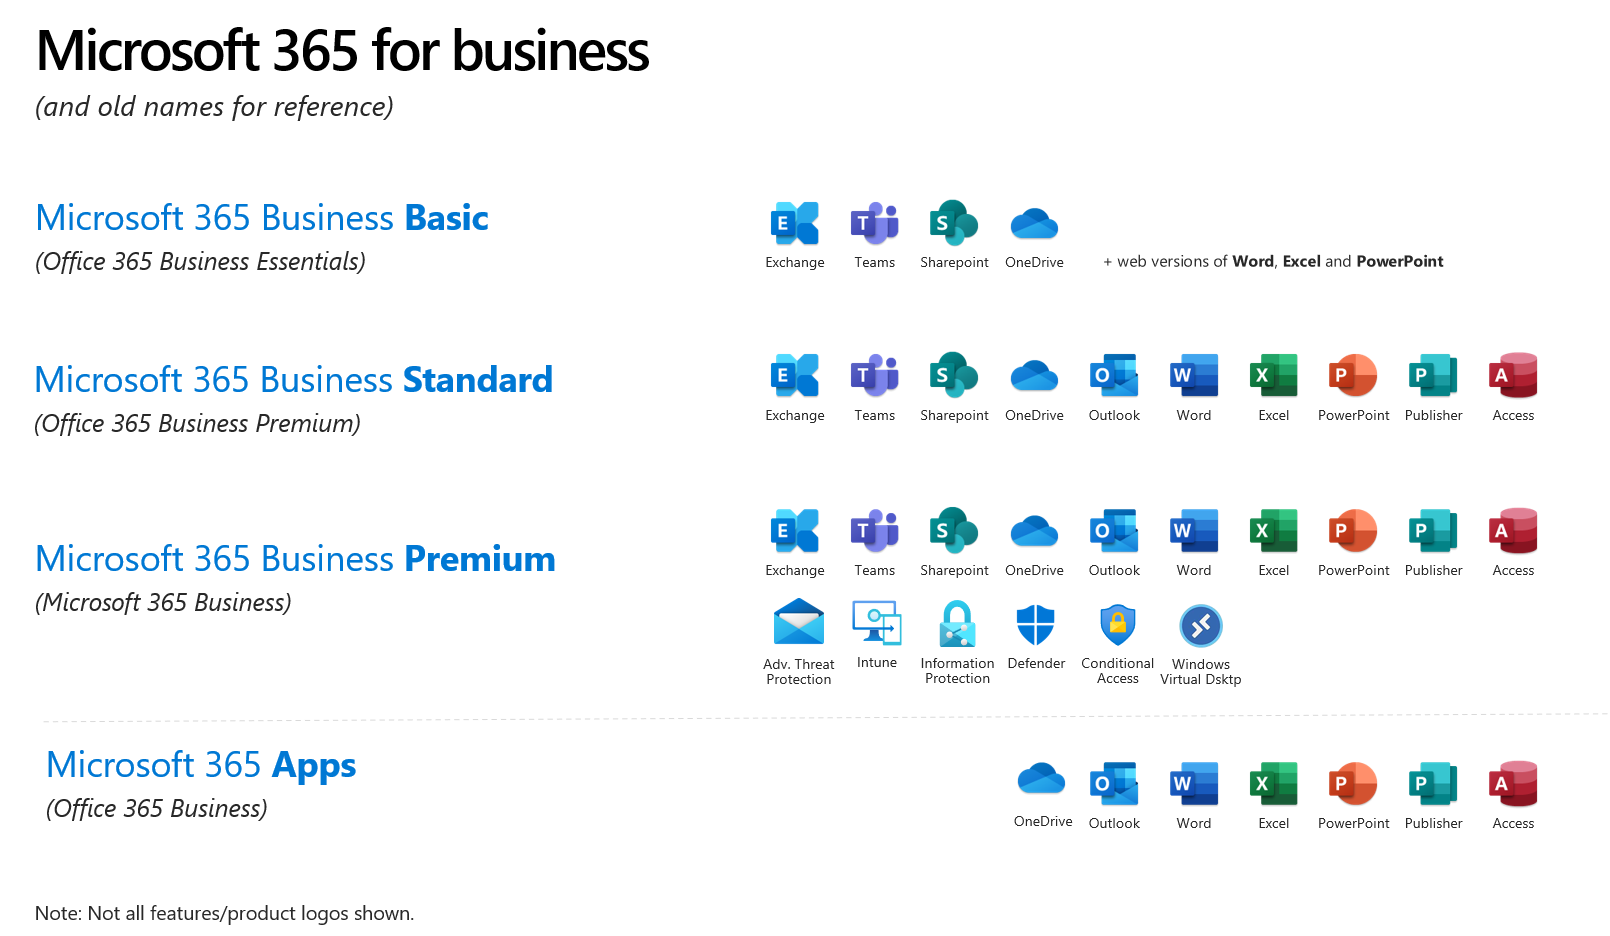 Microsoft 365 vs. Office 365: What's the difference?